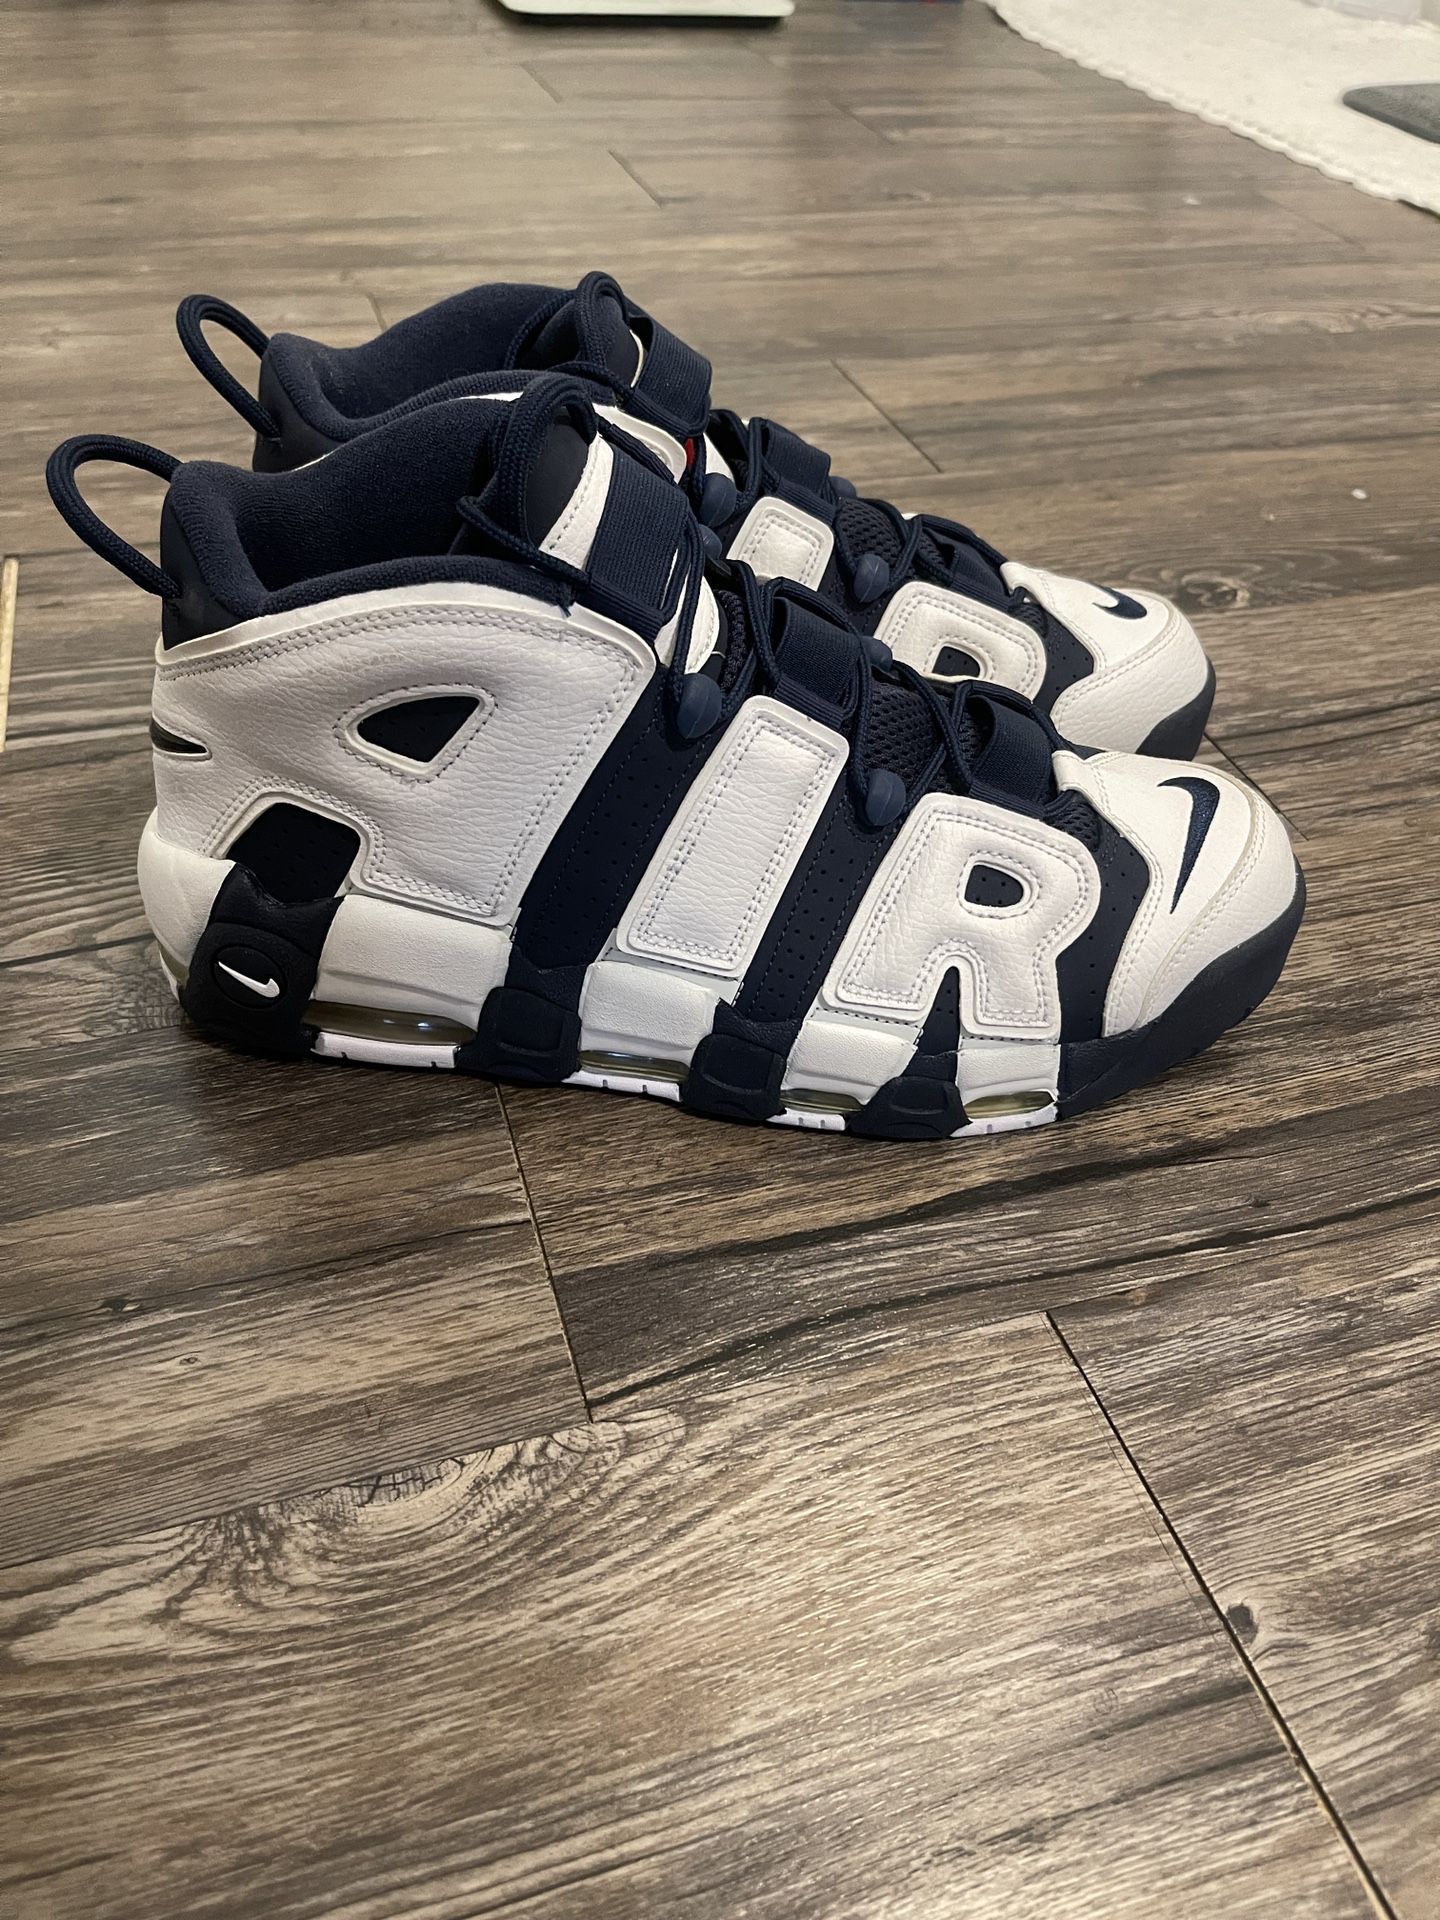 Nike Uptempo Olympic 2016 Size 12 DS